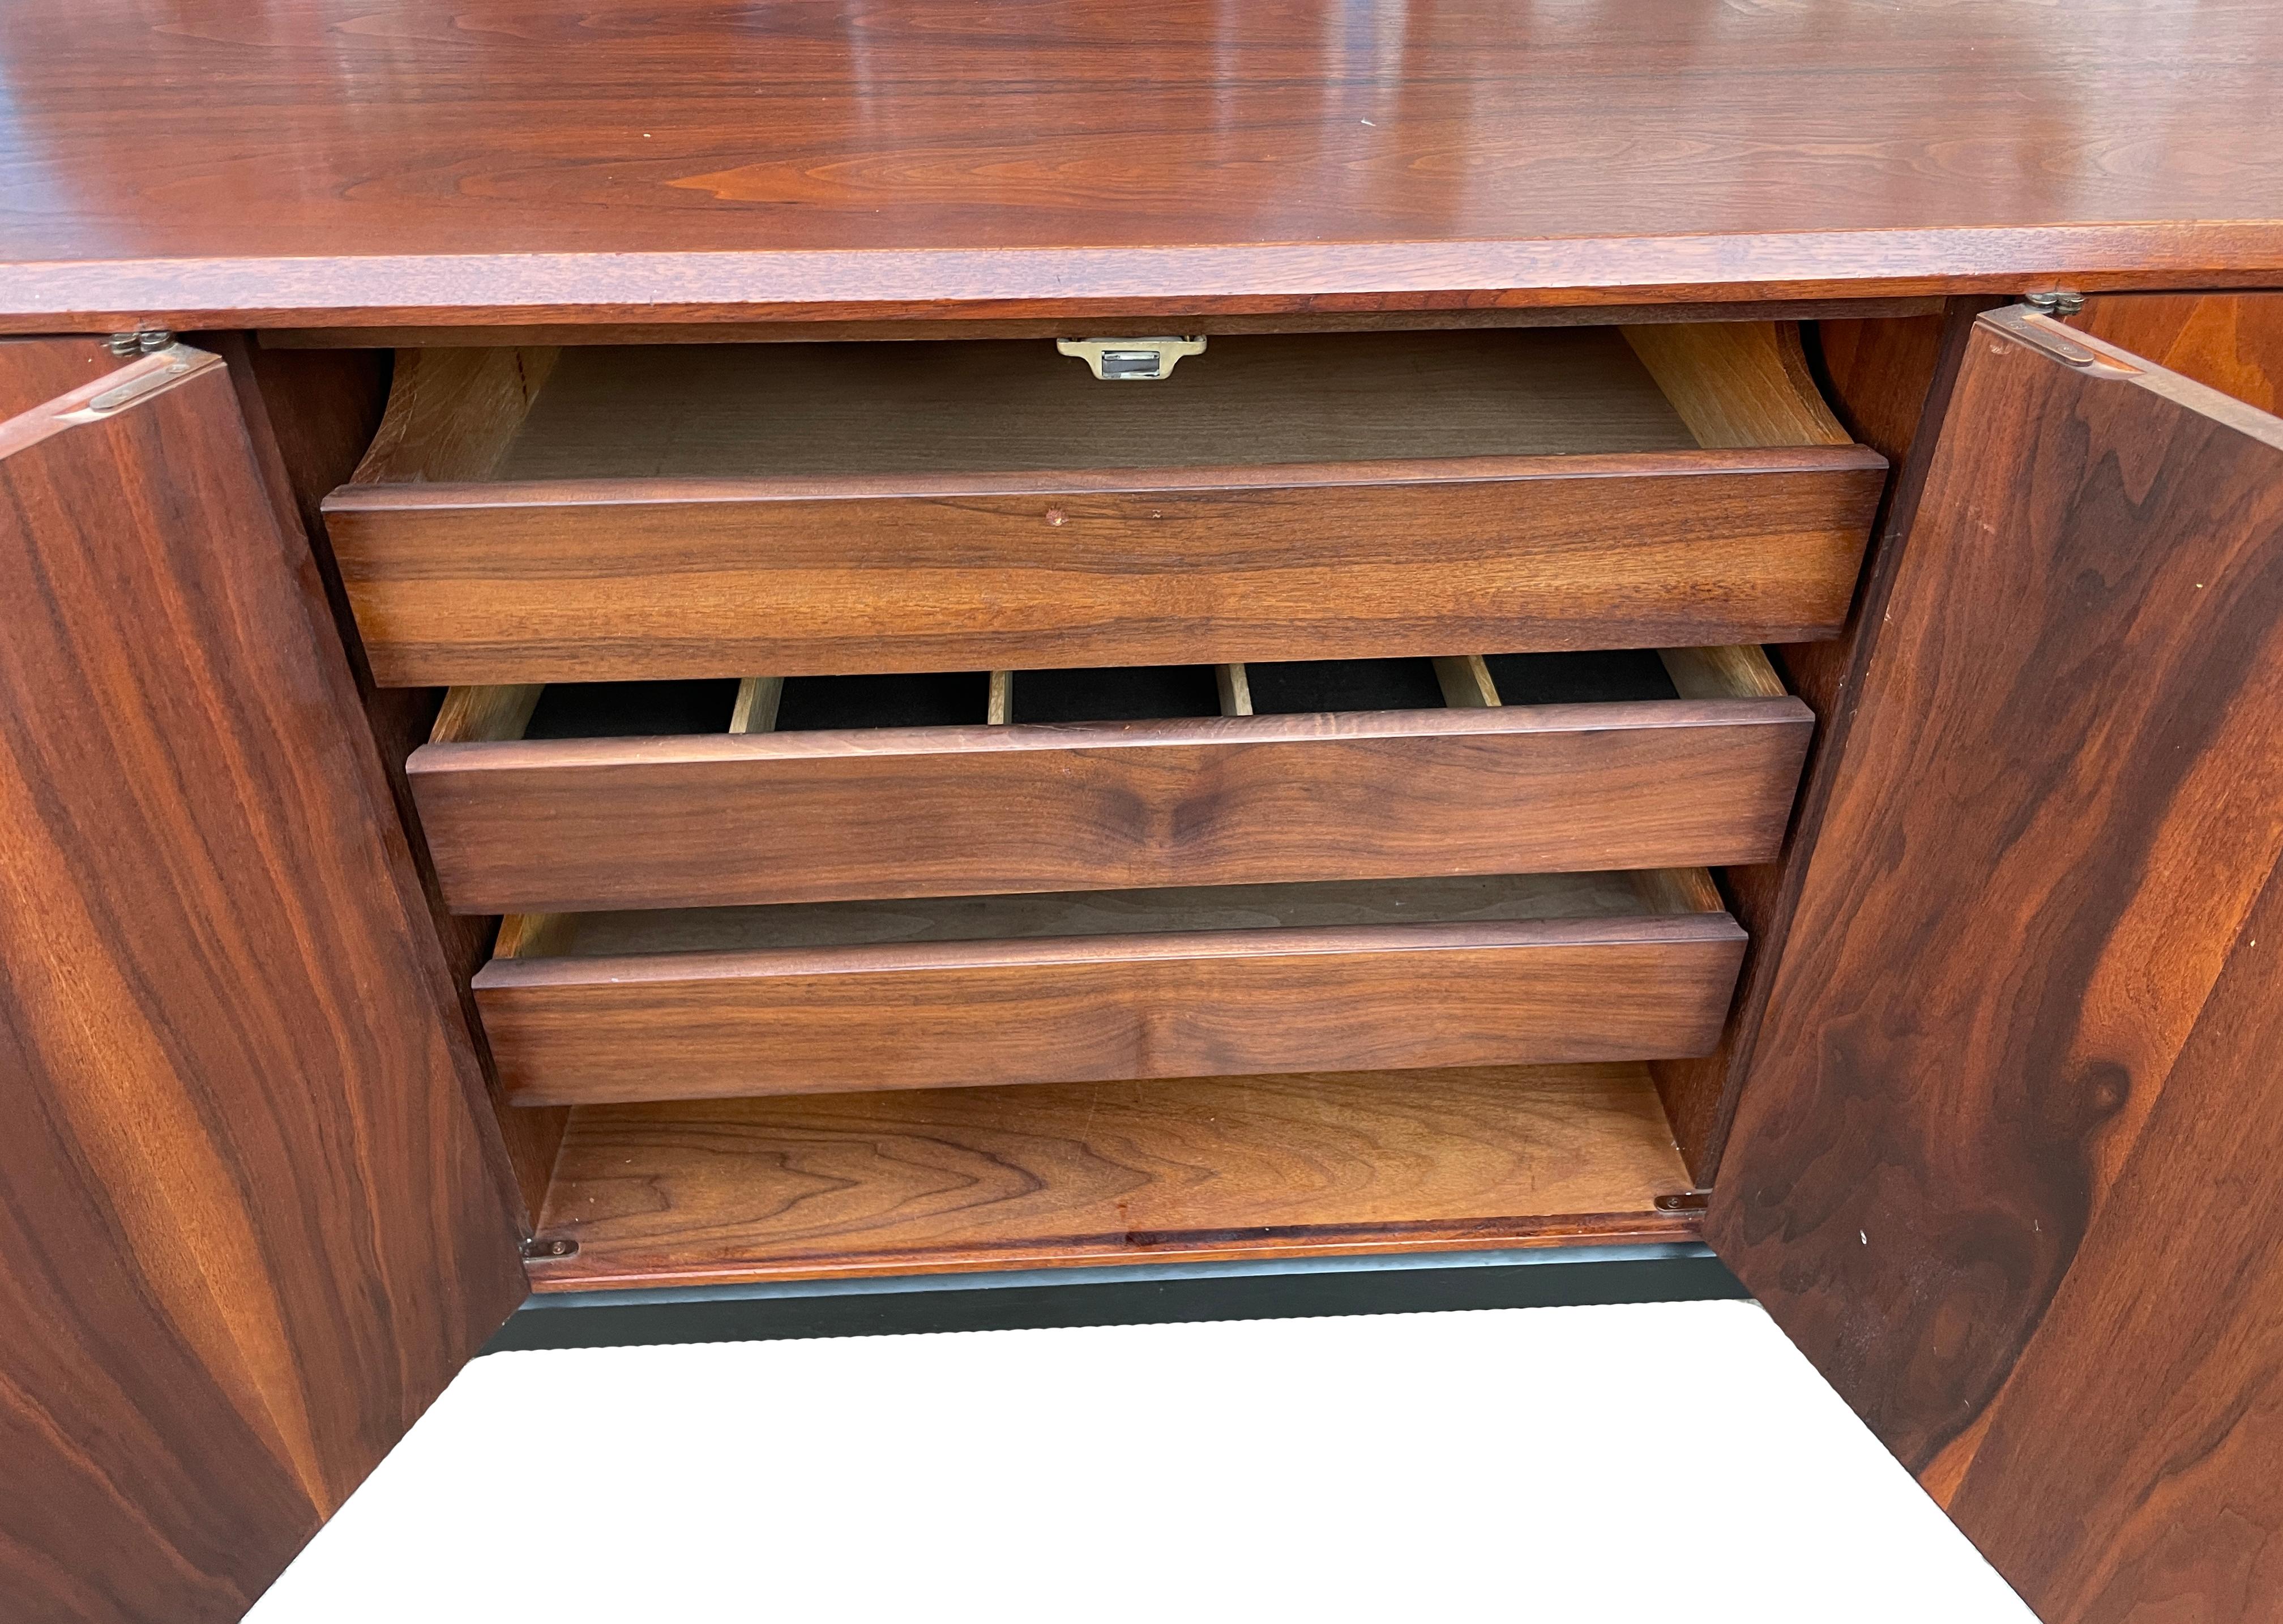 Mid-20th Century Mid-Century Modern Walnut Credenza Sideboard 6 Cabinet Doors with 3 Drawers